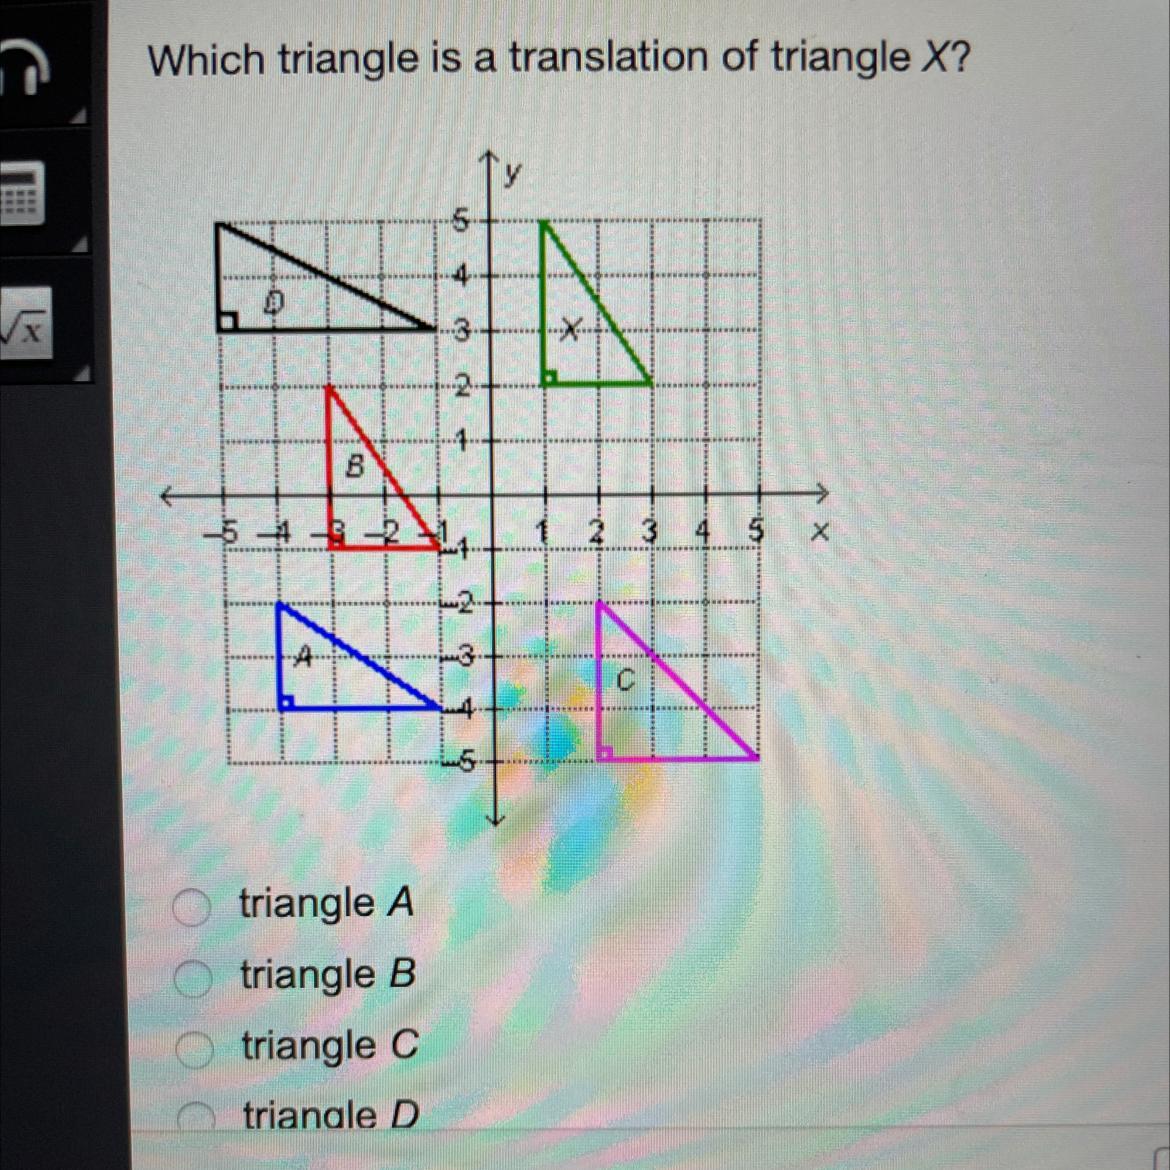 Which Triangle Is A Translation Of Triangle X?triangle Atriangle Btriangle Ctriangle D